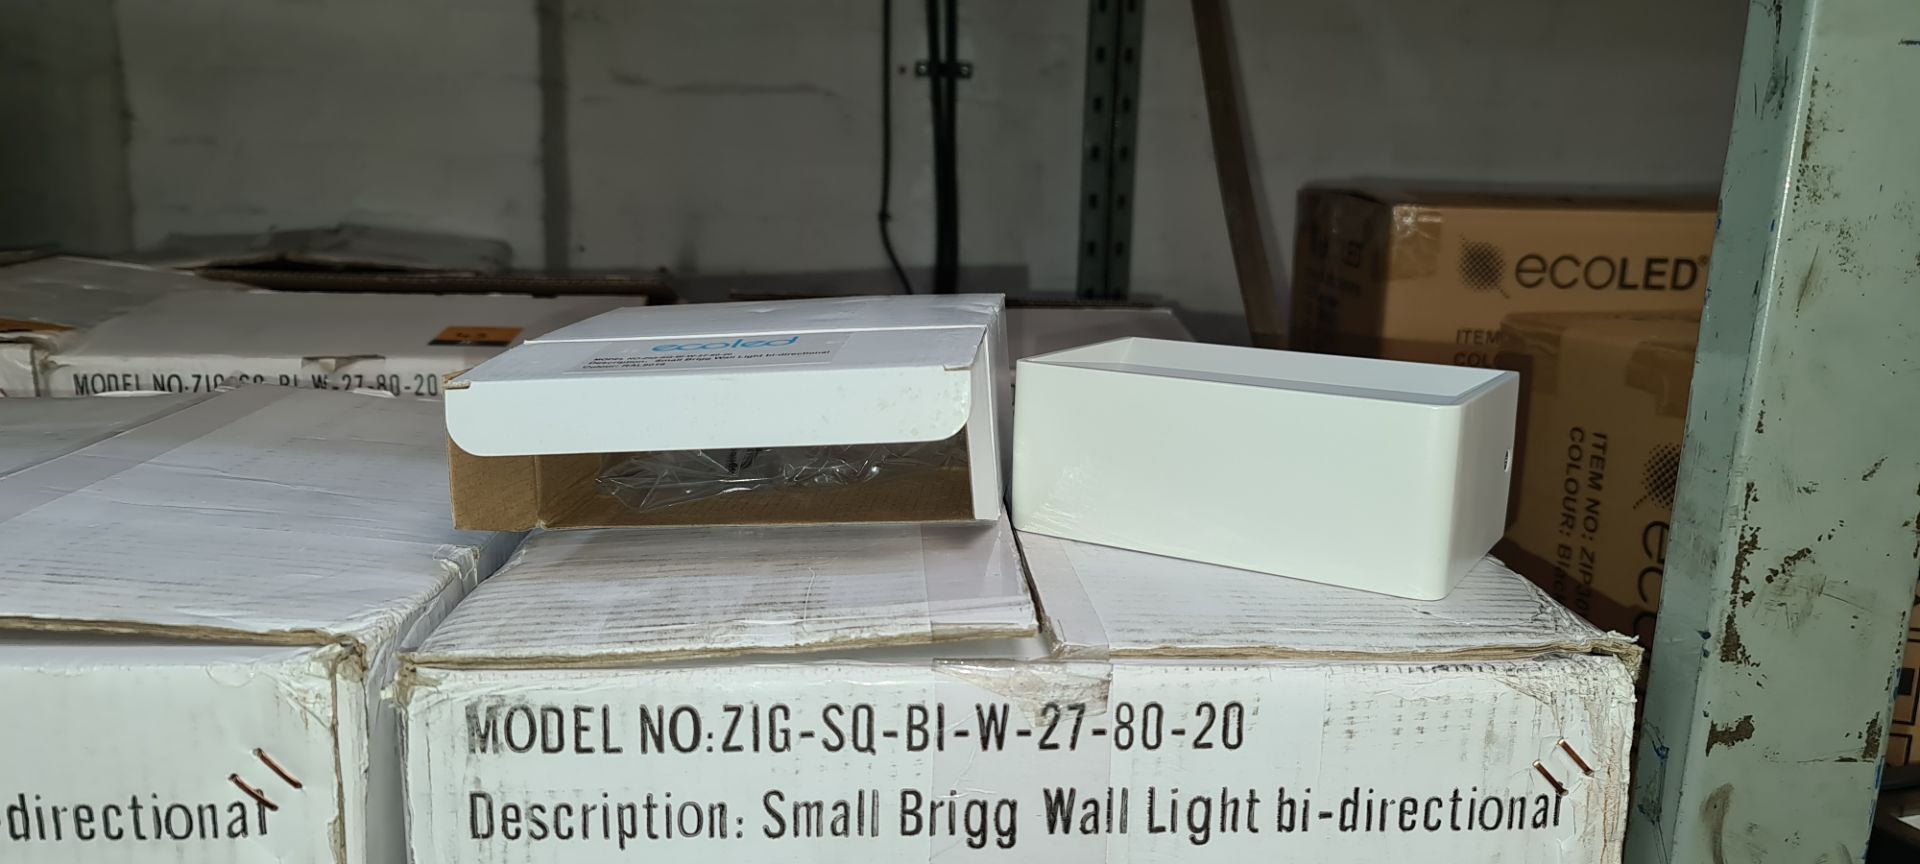 20 off small Brigg wall light (bi-directional), colour white (RAL9016), model ZIG-SQ-BL-W-27-80-20 - Image 6 of 14